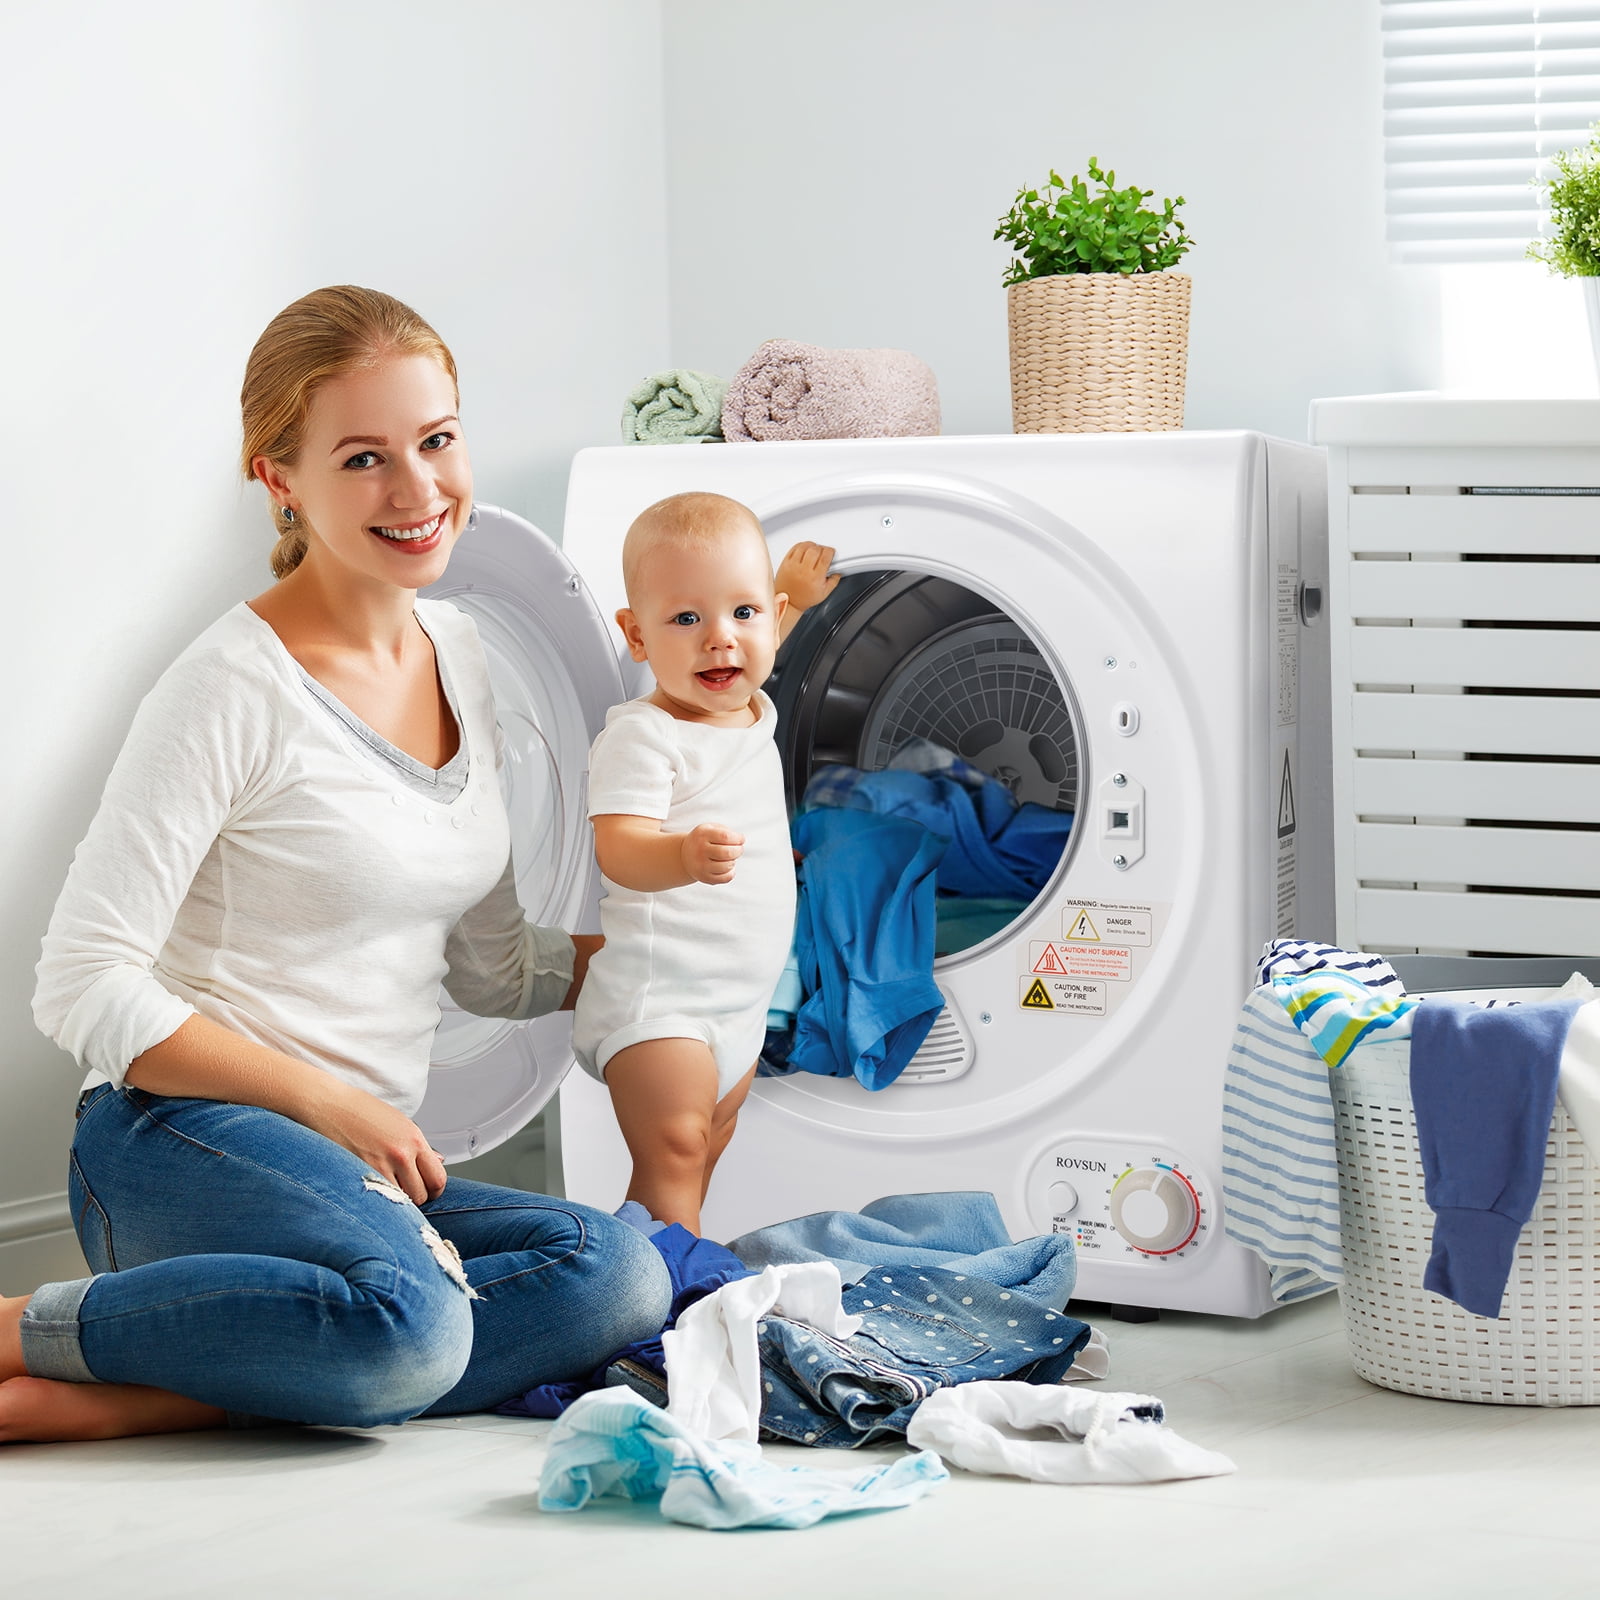 Household Small Dryer, Tumble Dryer, Underwear, Baby Clothes Disinfection  Machine clothes dryer - AliExpress